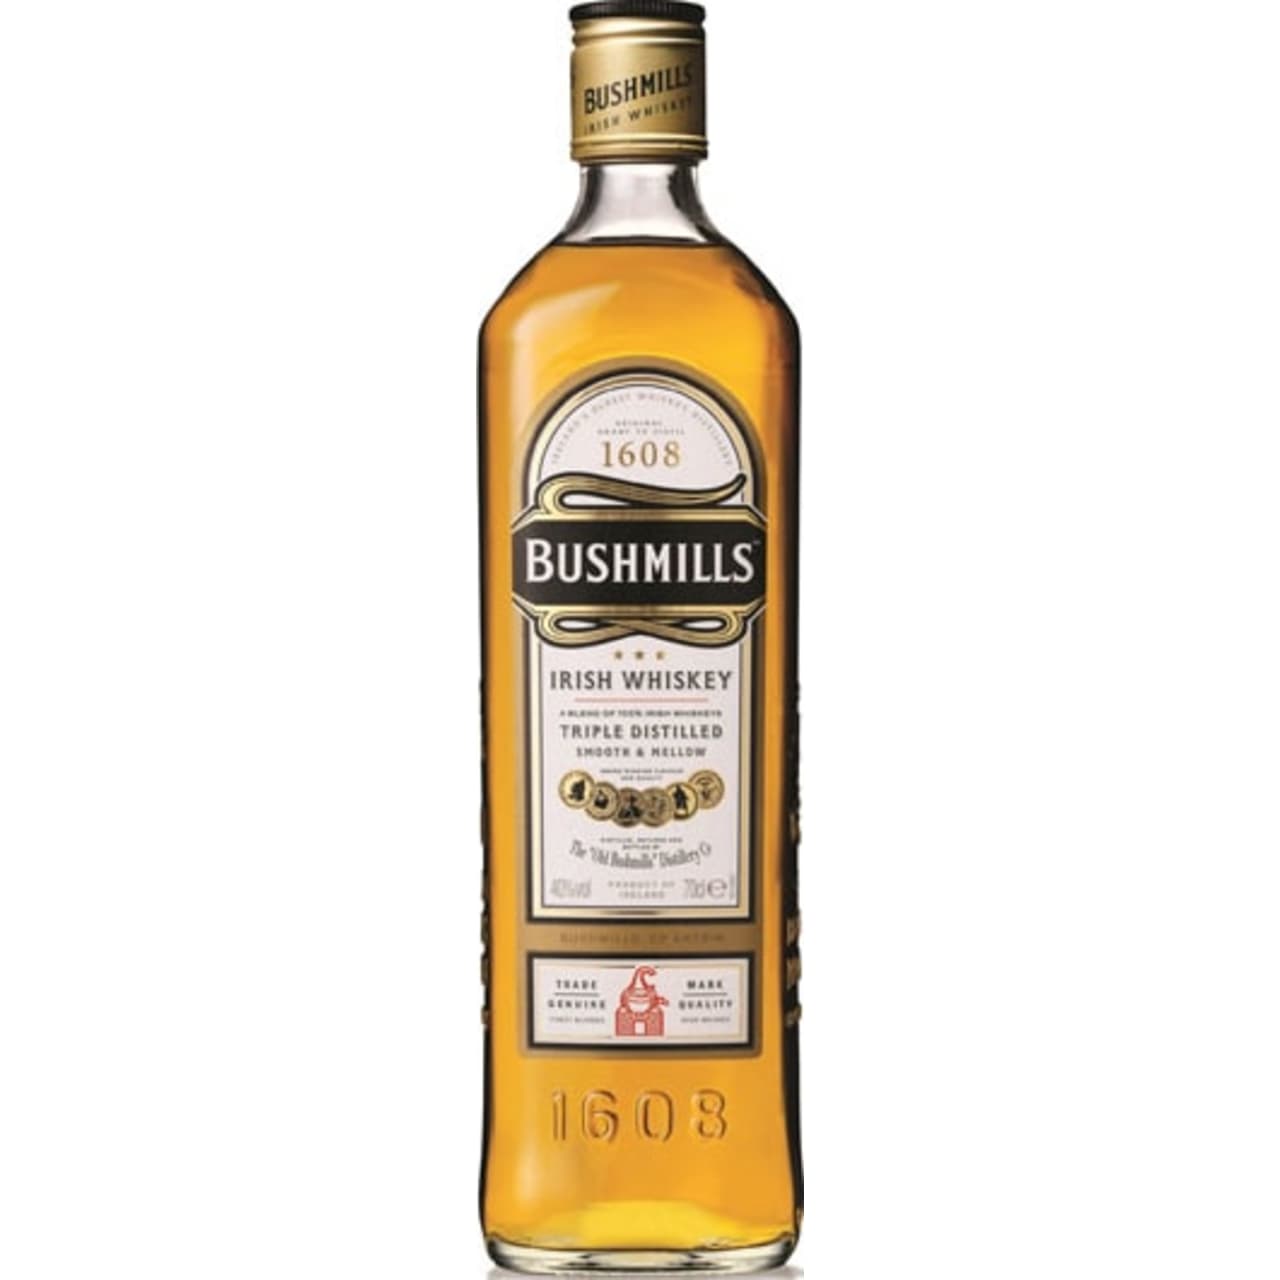 An approachable whiskey which has been matured in both bourbon and sherry casks.